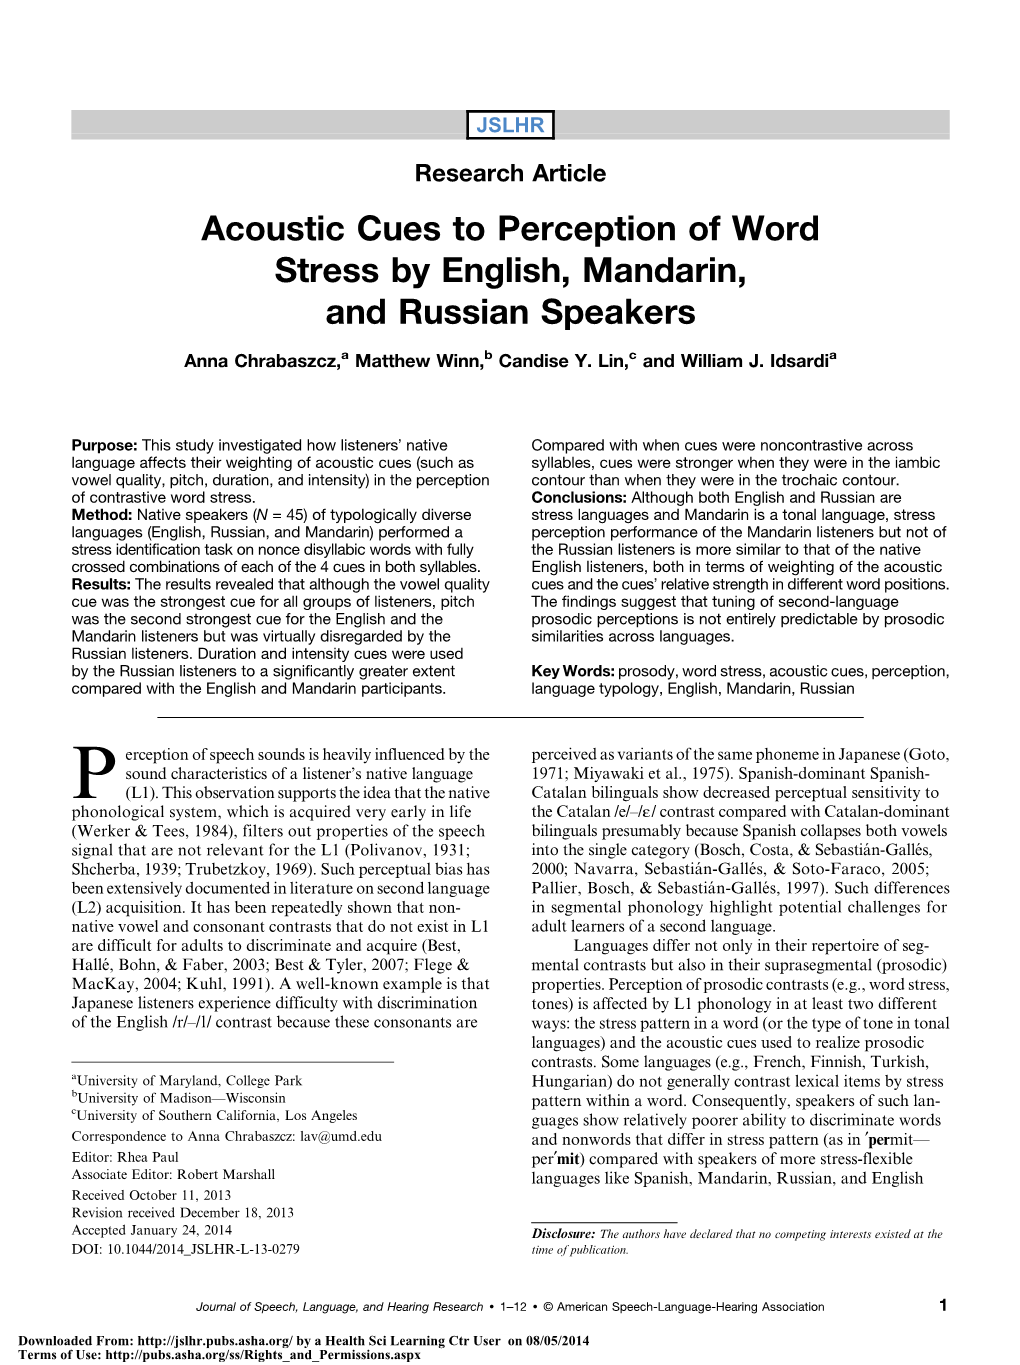 Acoustic Cues to Perception of Word Stress by English, Mandarin, and Russian Speakers